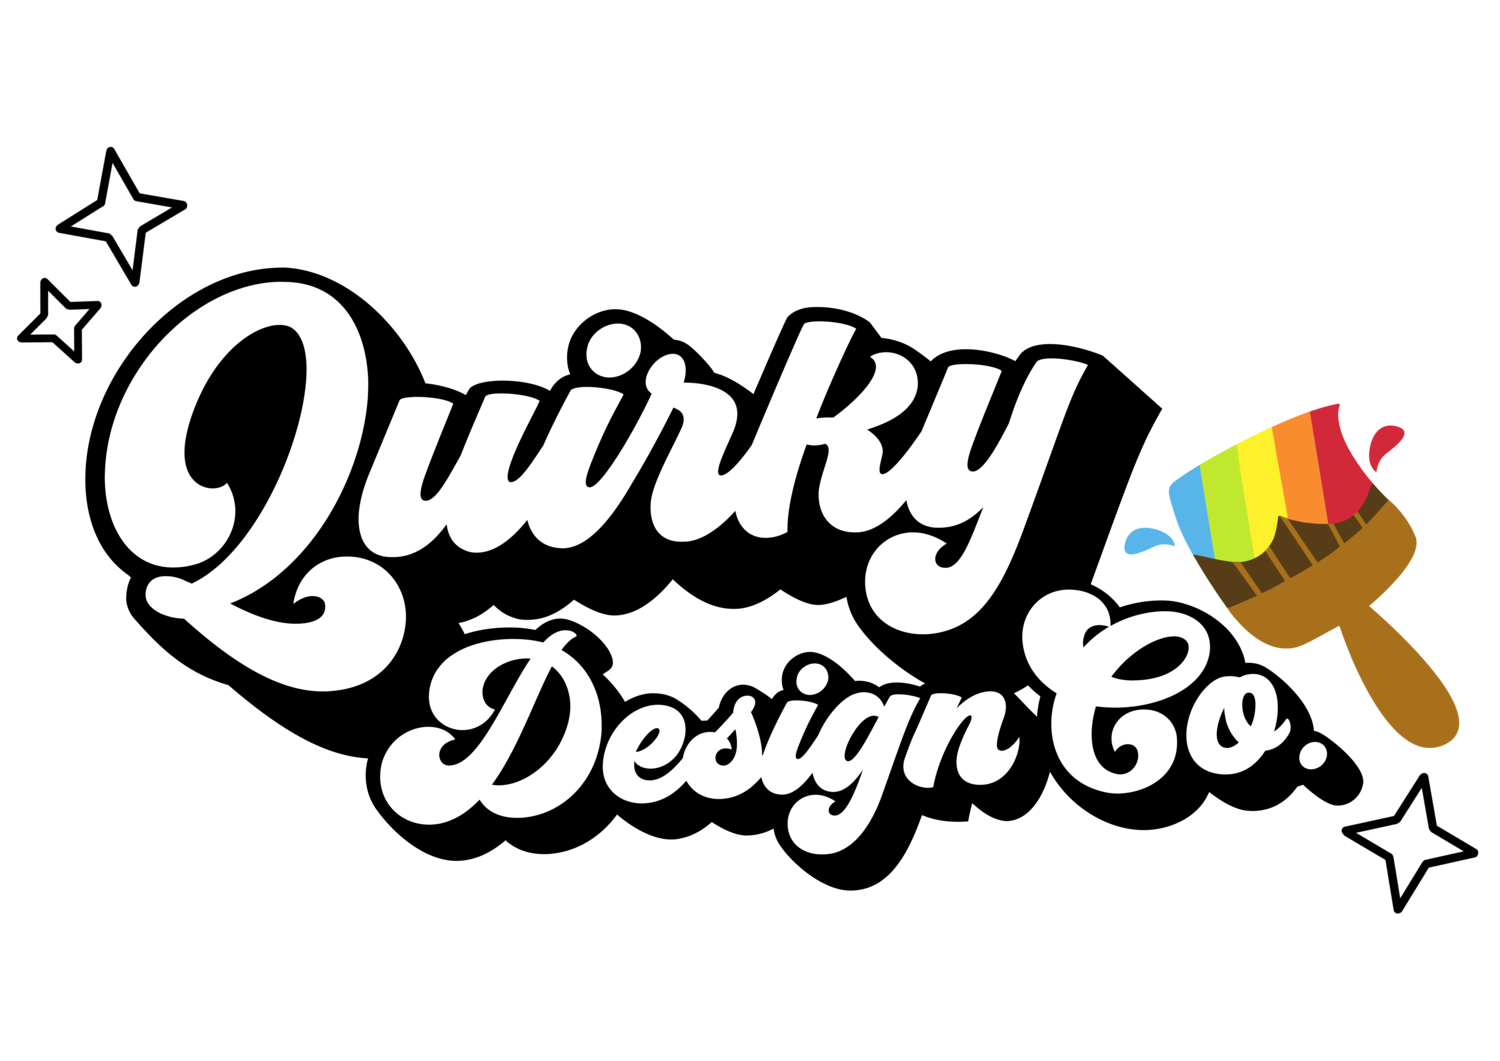 Quirky Design Co